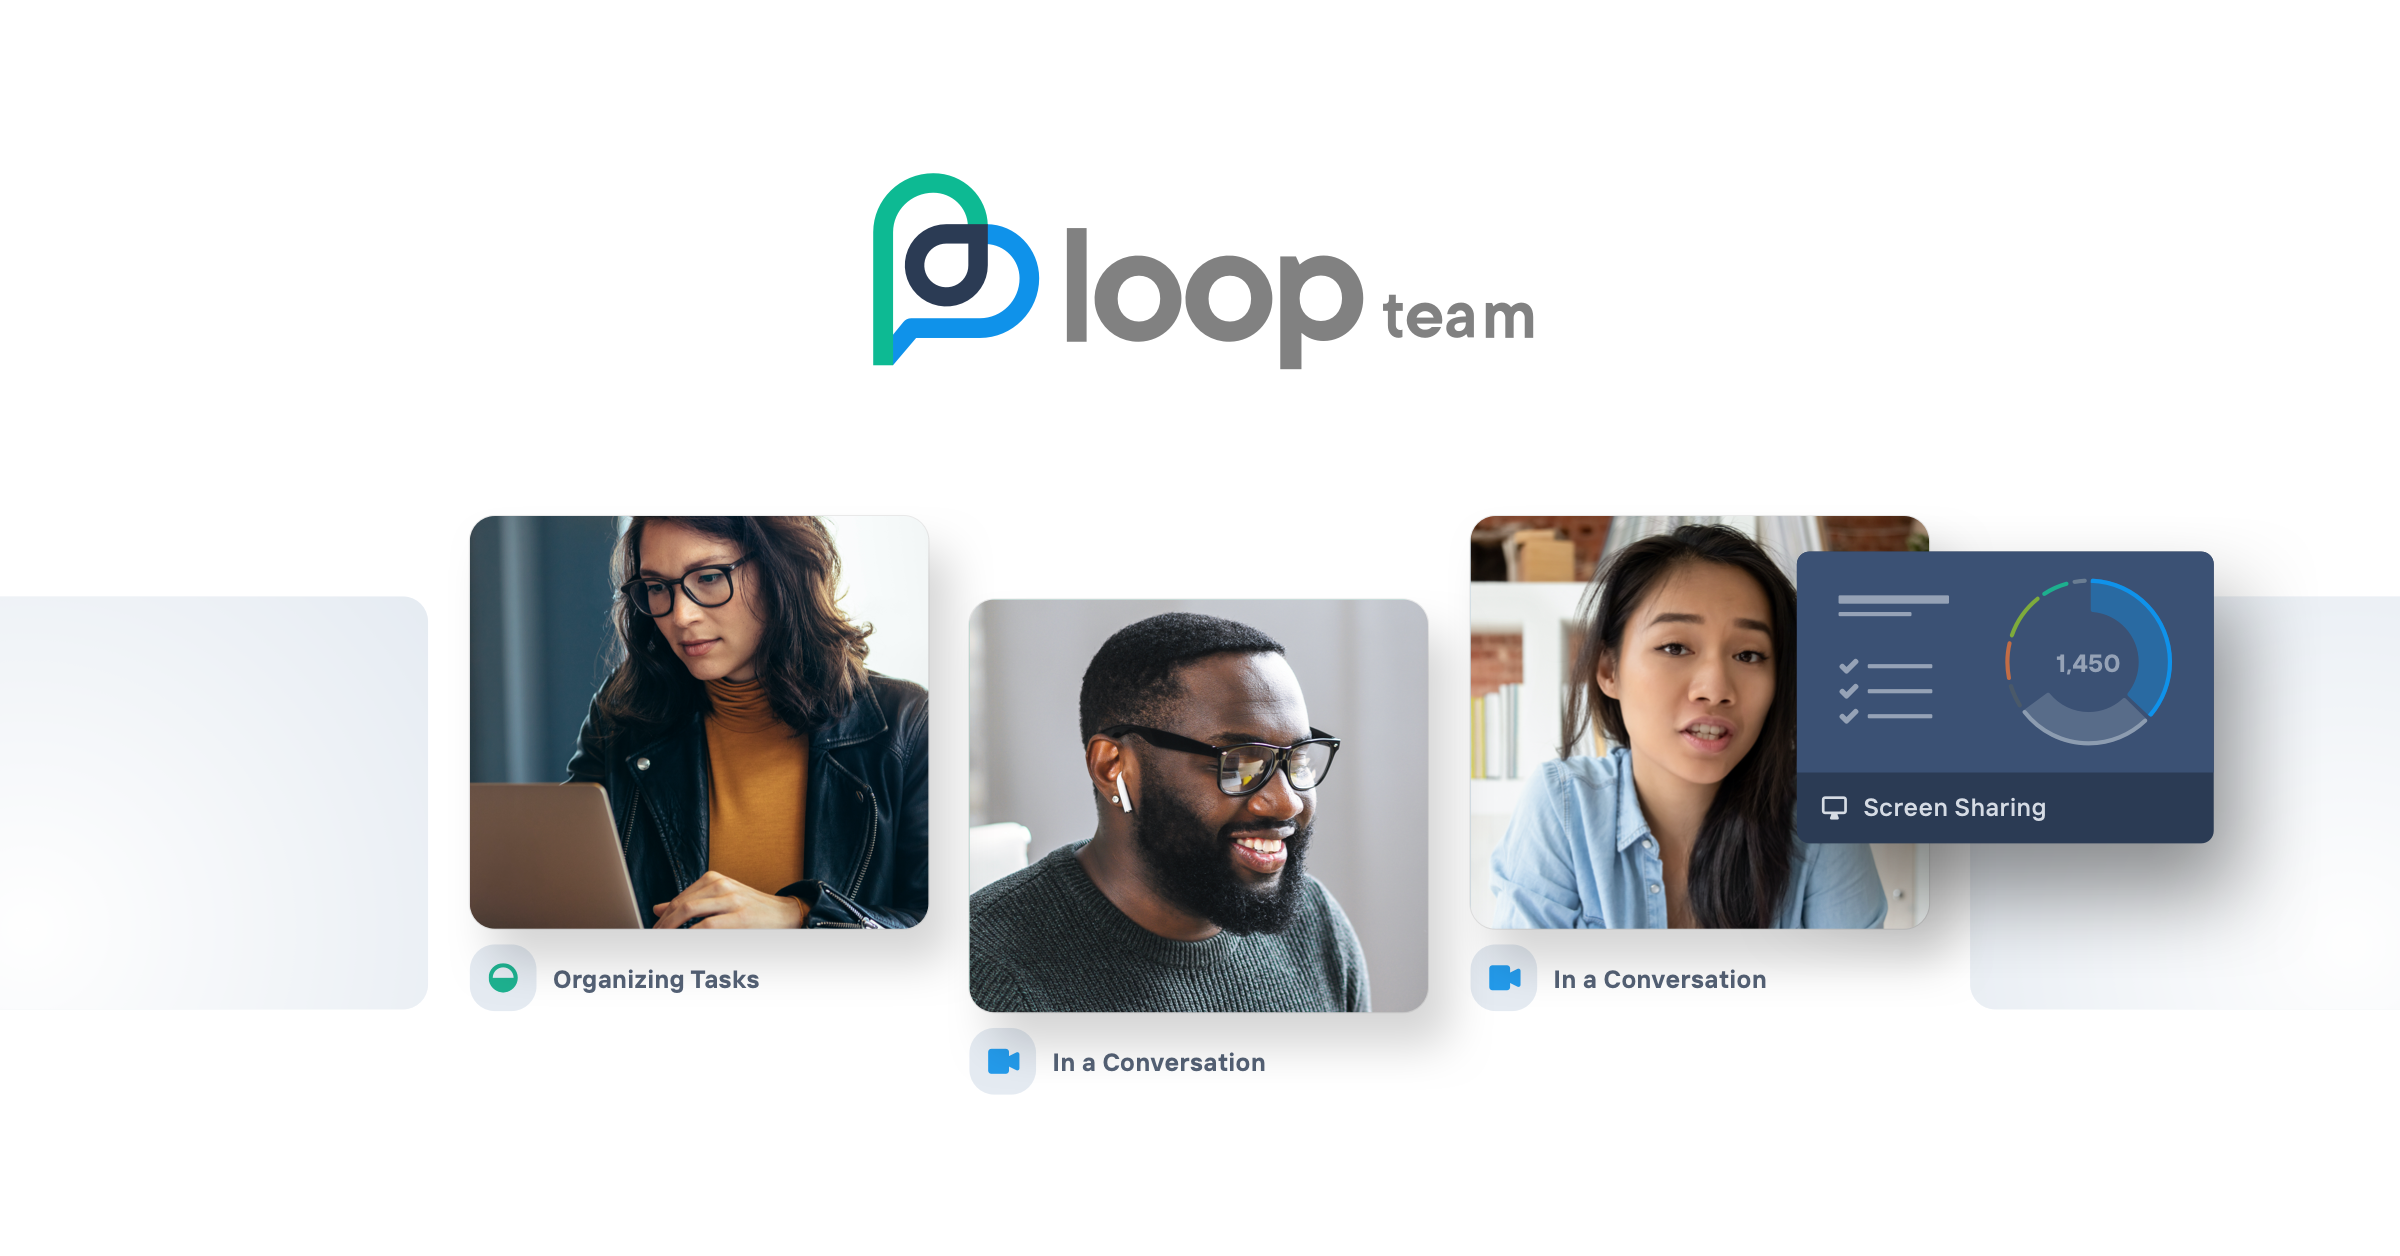 Find detailed information about Loop Team